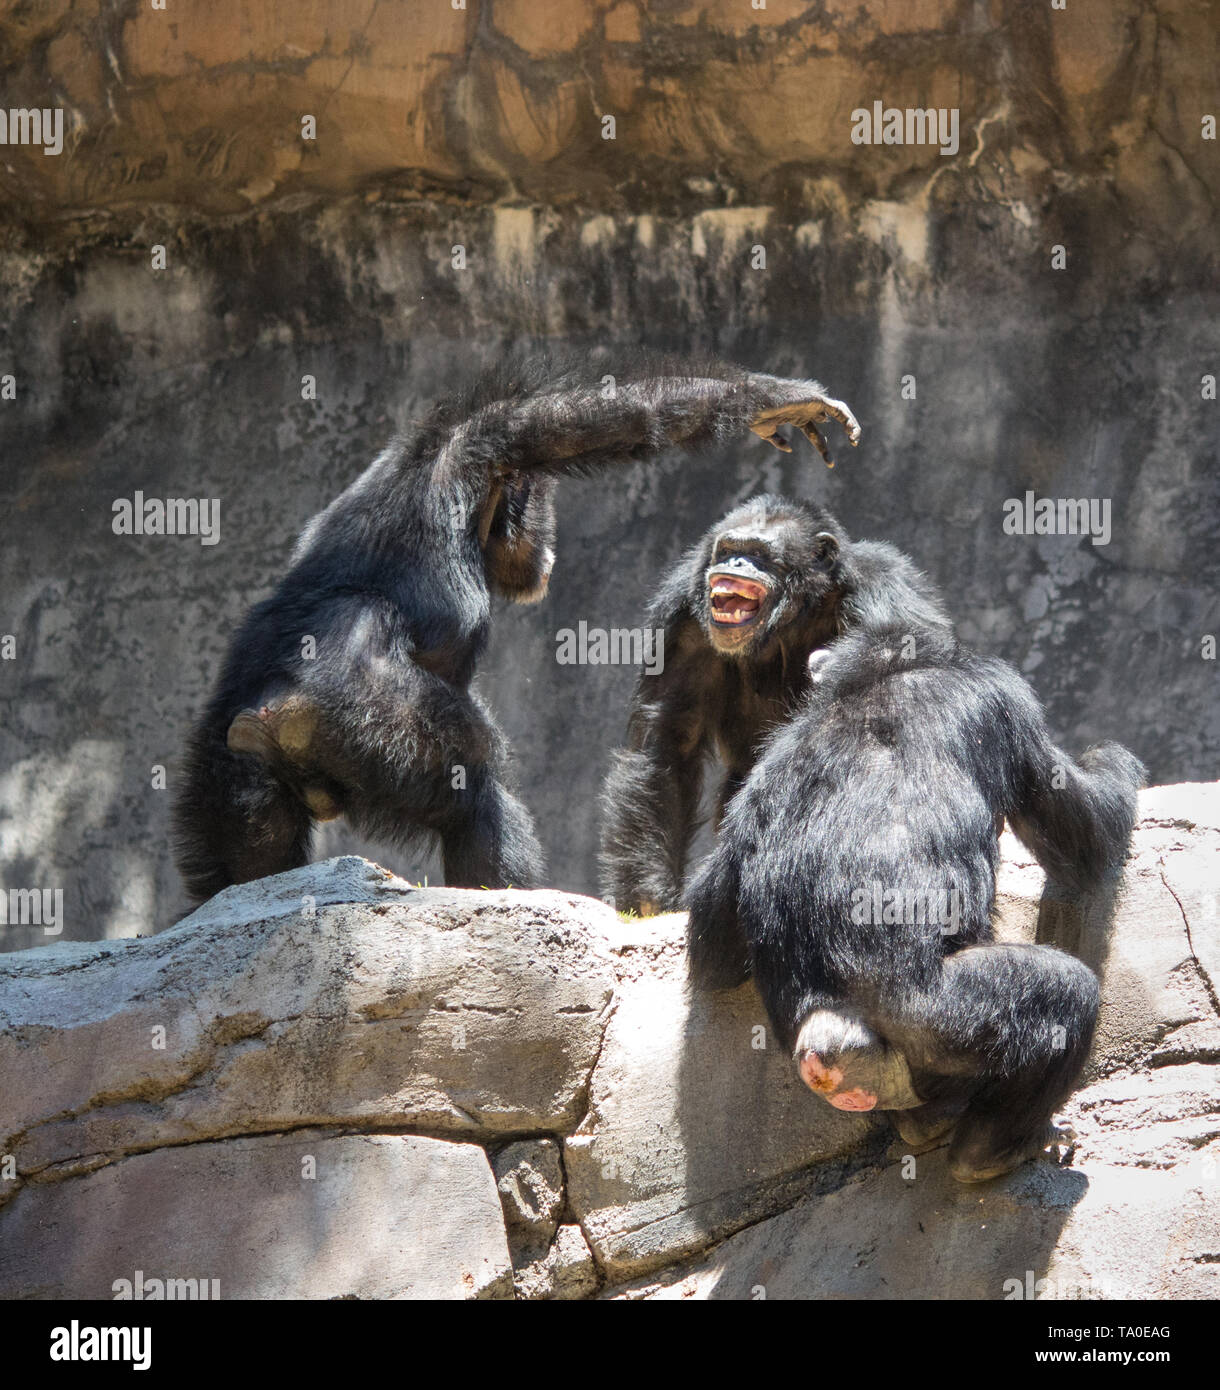 Chimpanzee alpha male exerting dominance over other chimpanzees Stock Photo